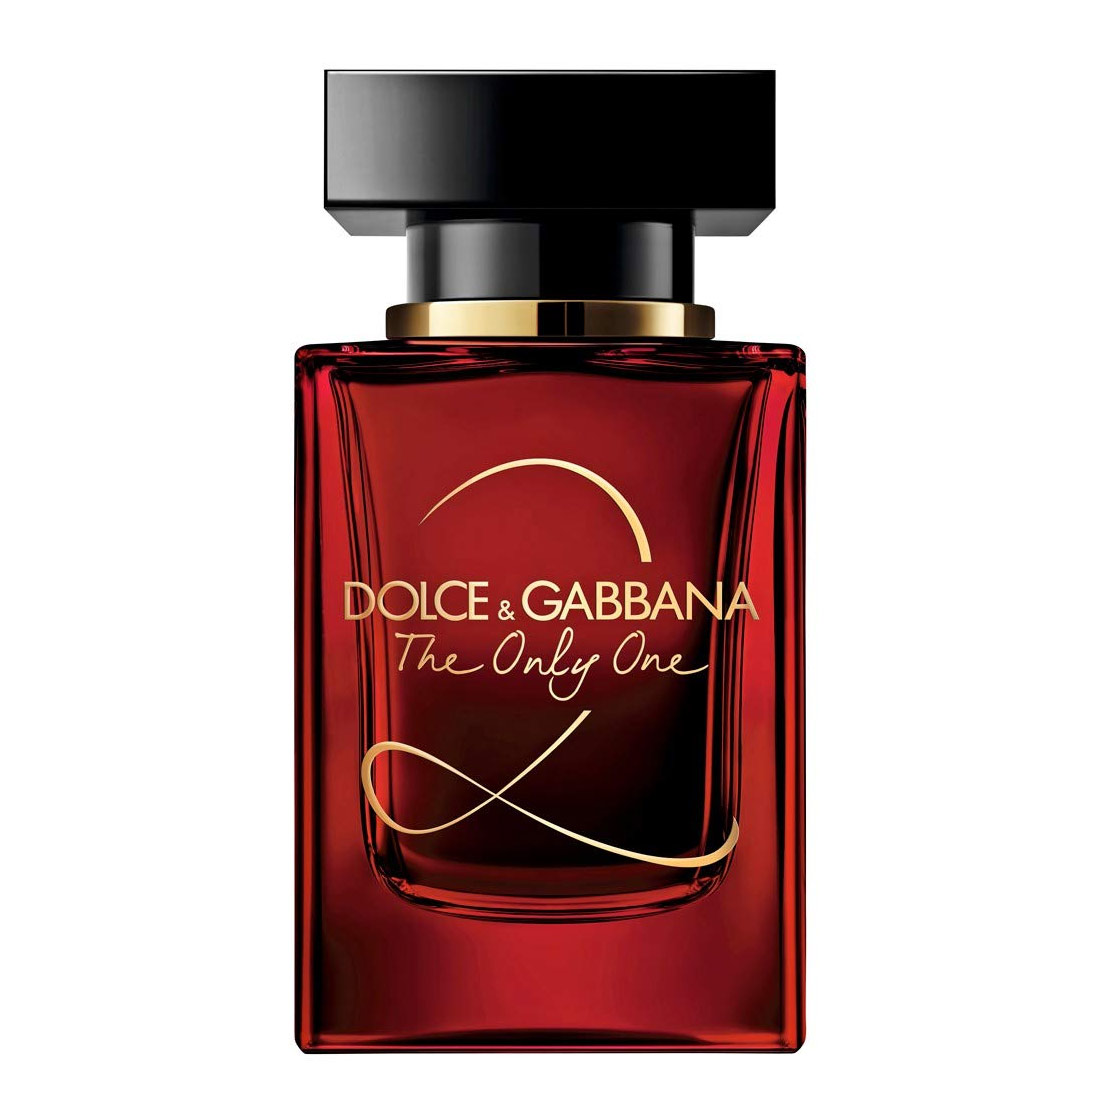 DandG-The-Only-One-2-Dolce-and-Gabbana